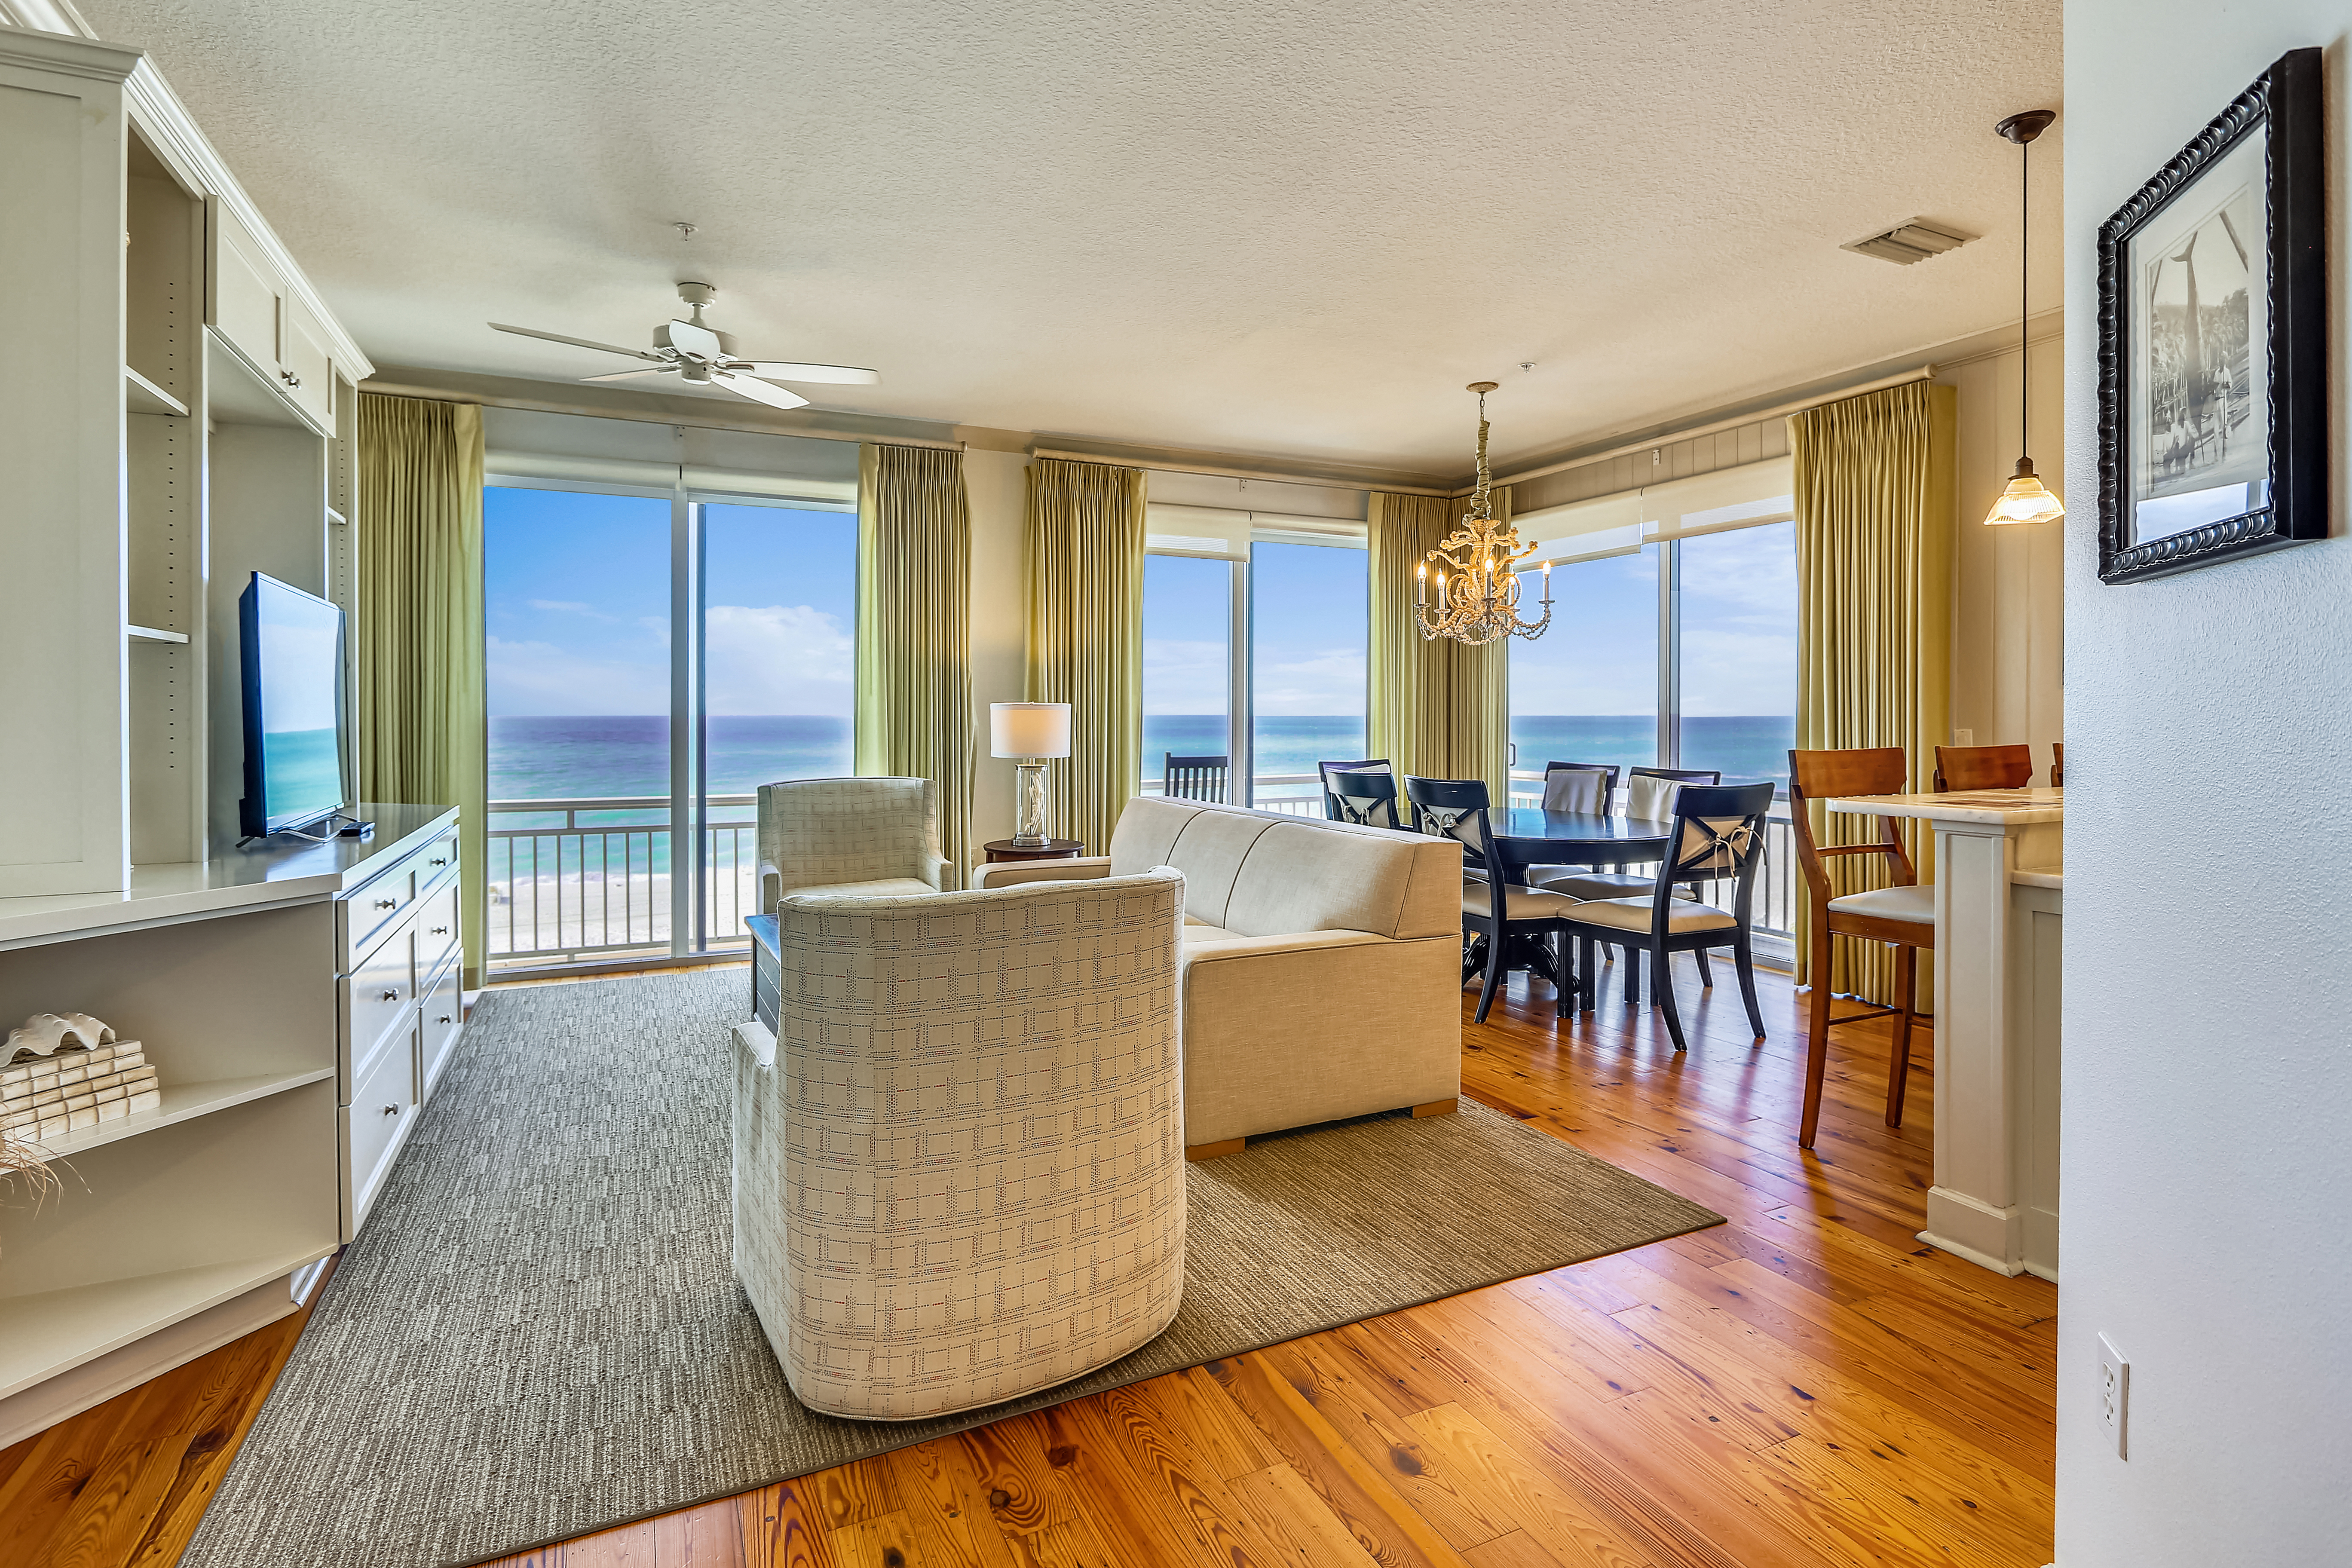 Property Image 2 - Refined Beach Front Condo with Great Views